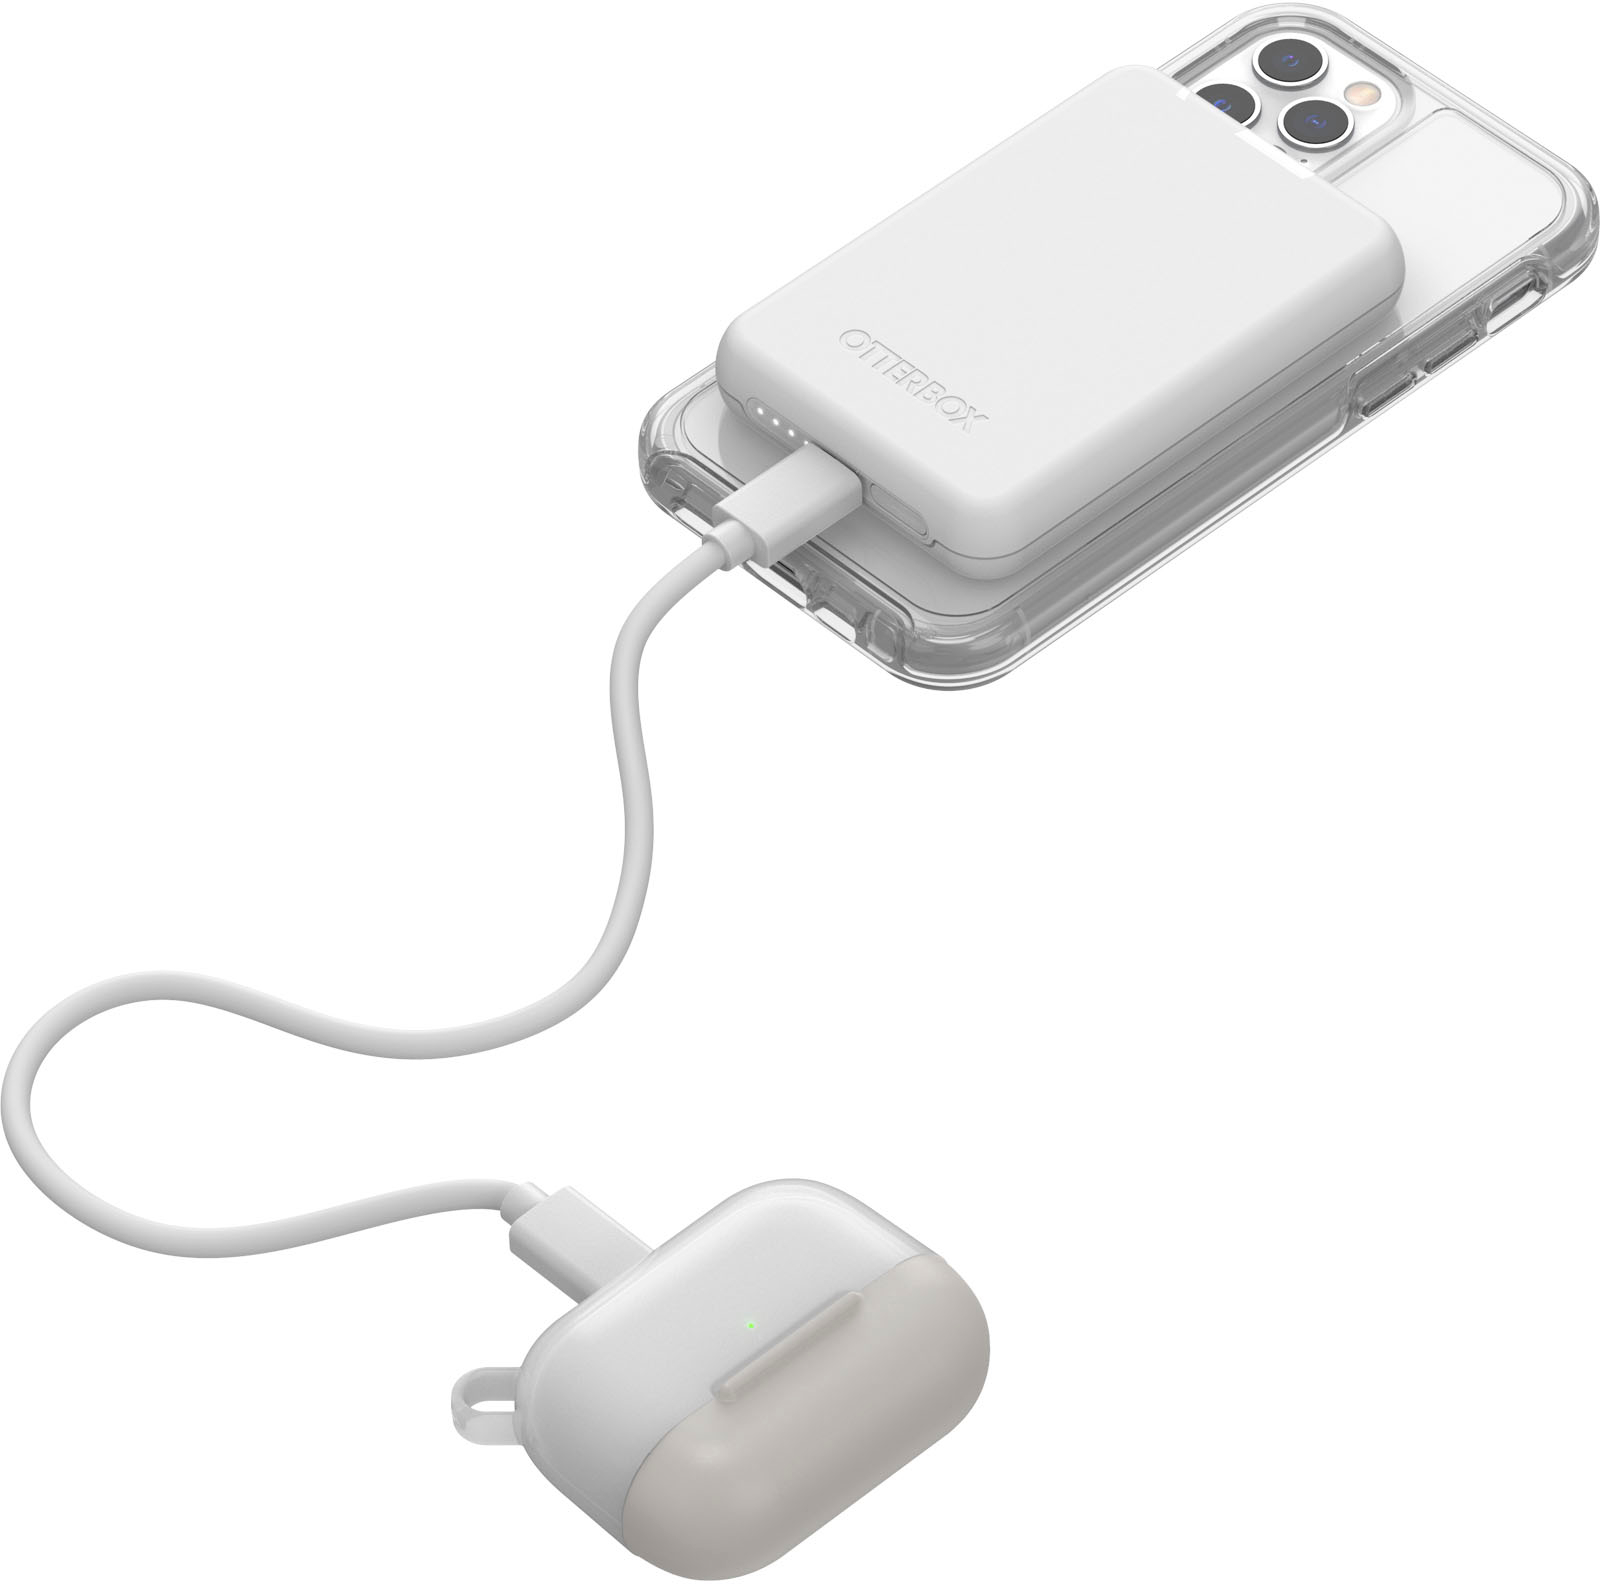 Best Buy: OtterBox 5k mAh Wireless Power Bank for MagSafe White 78-80566